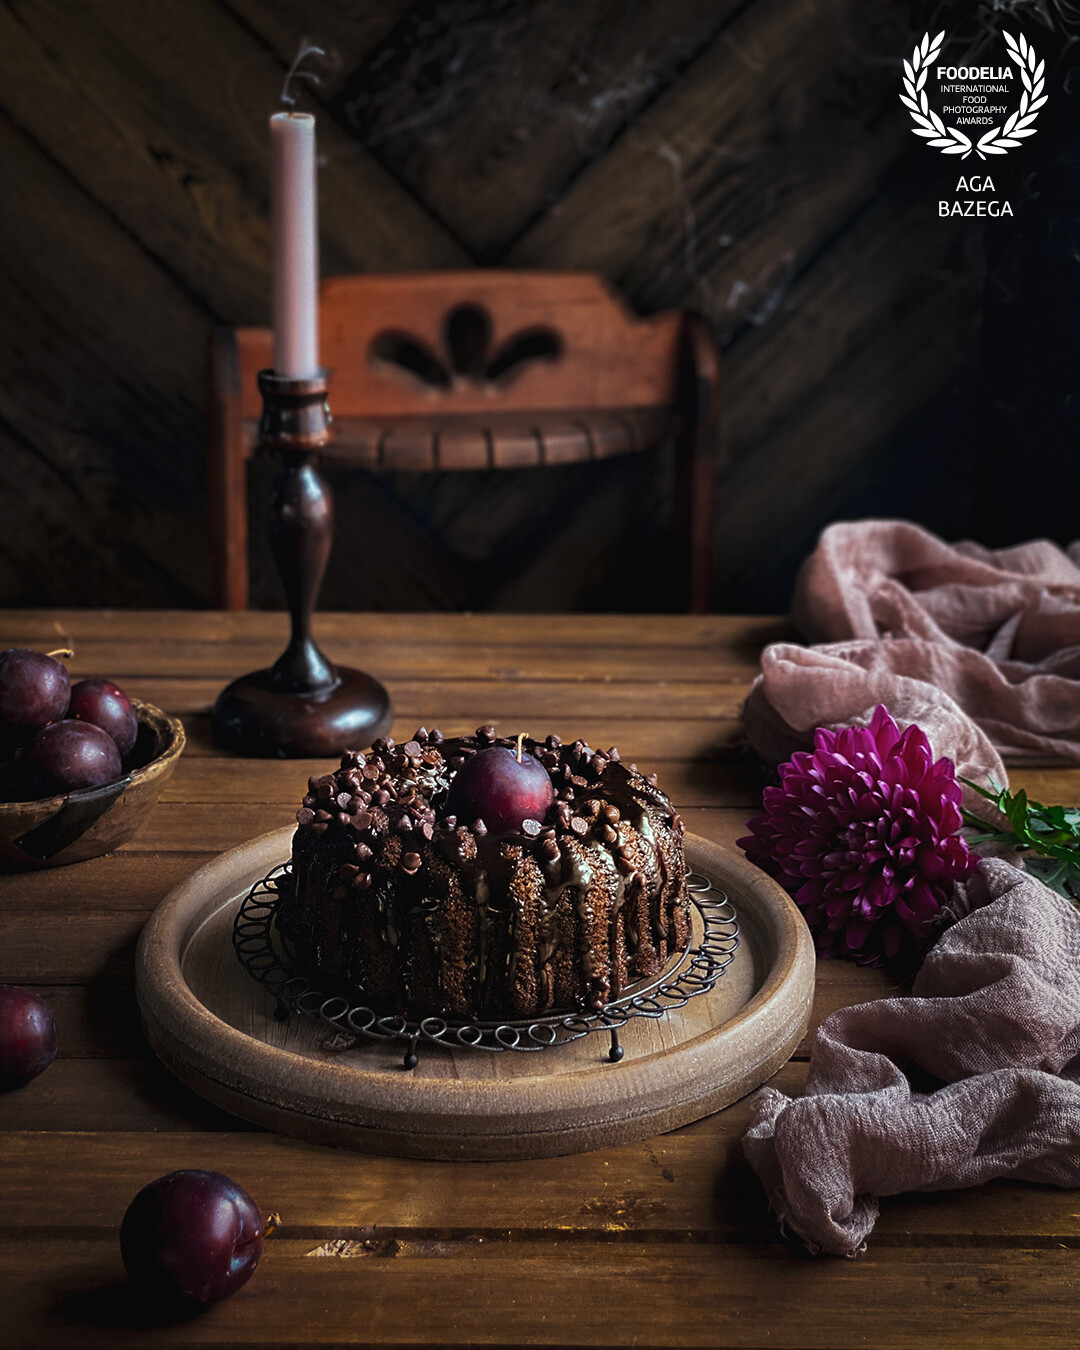 Chocolate plum cake, captured with a natural light.